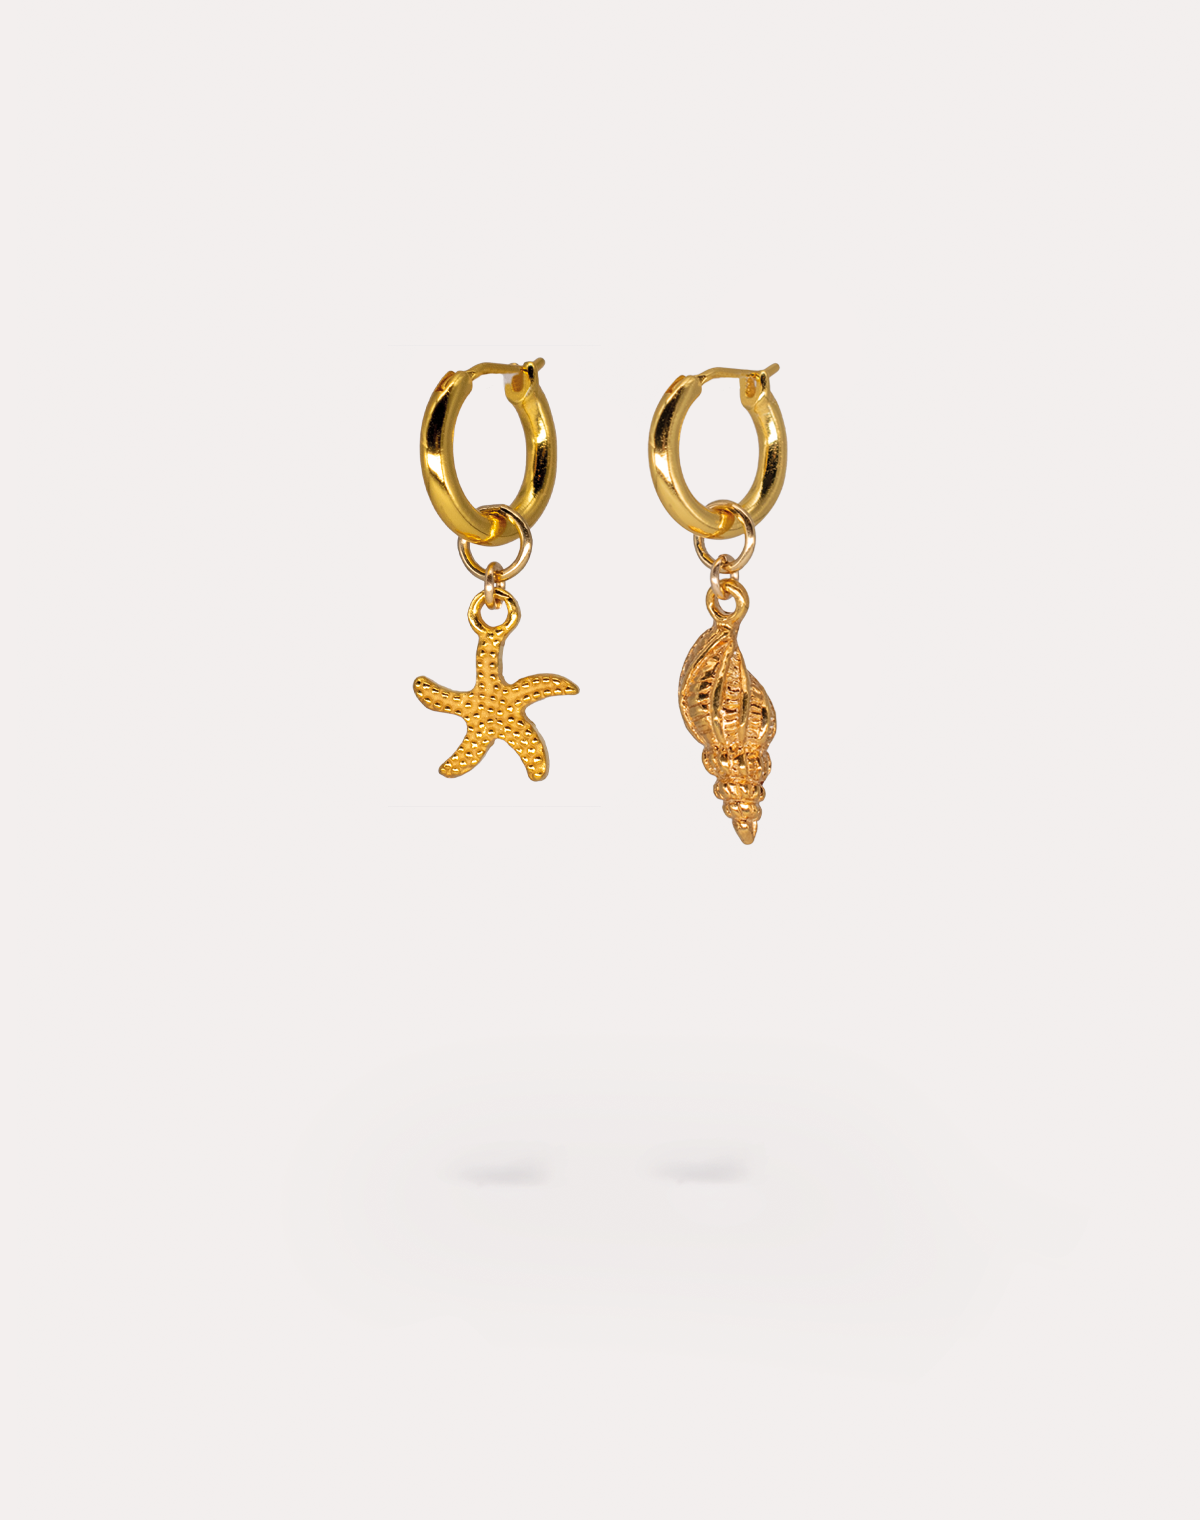 Shell and Starfish Hoop Earring Set in Gold | NUE Hoops